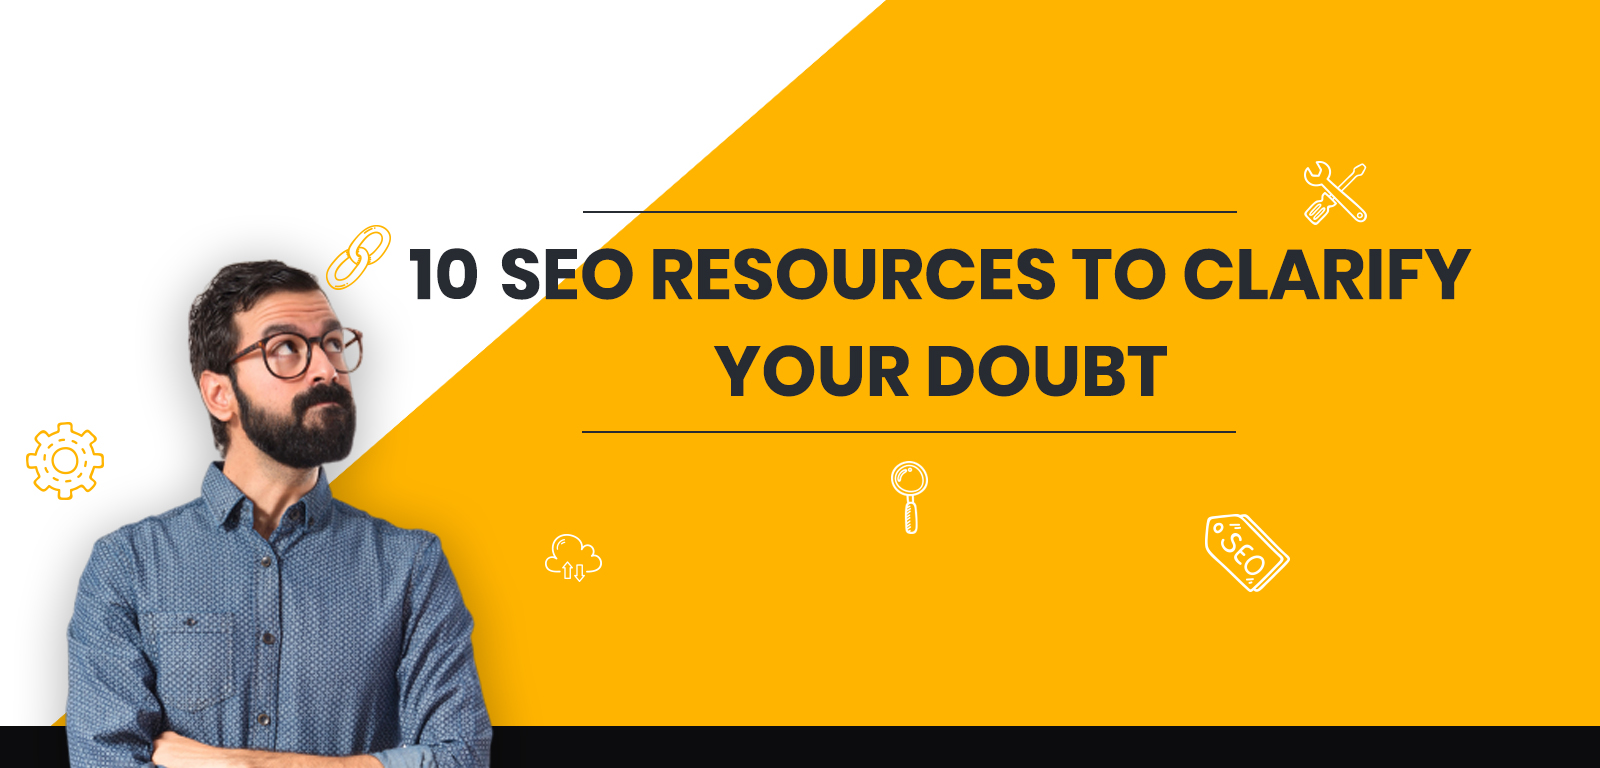 10 SEO Resources to clarify your doubt